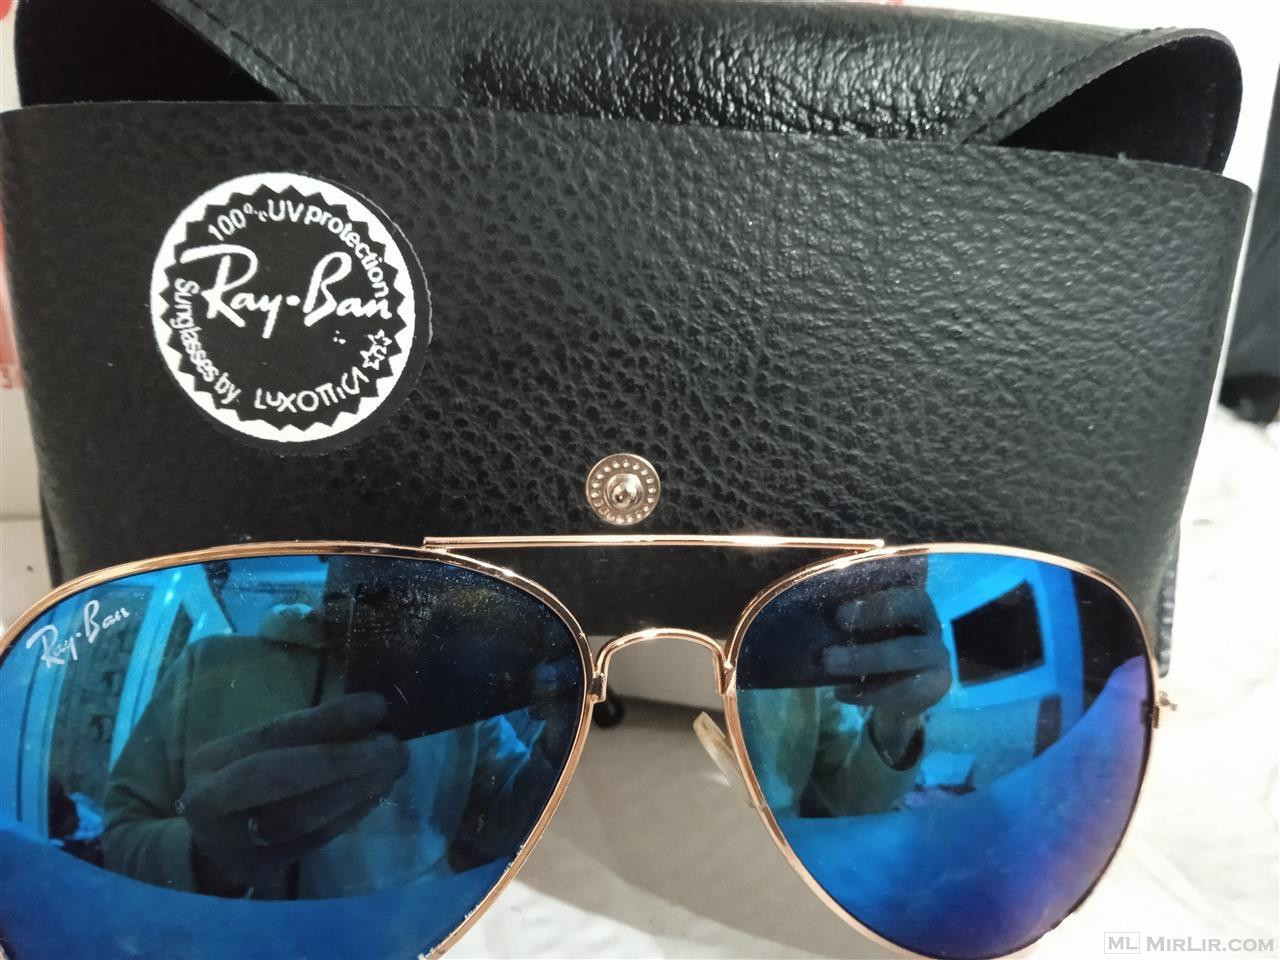 Syze ray ban origjinale